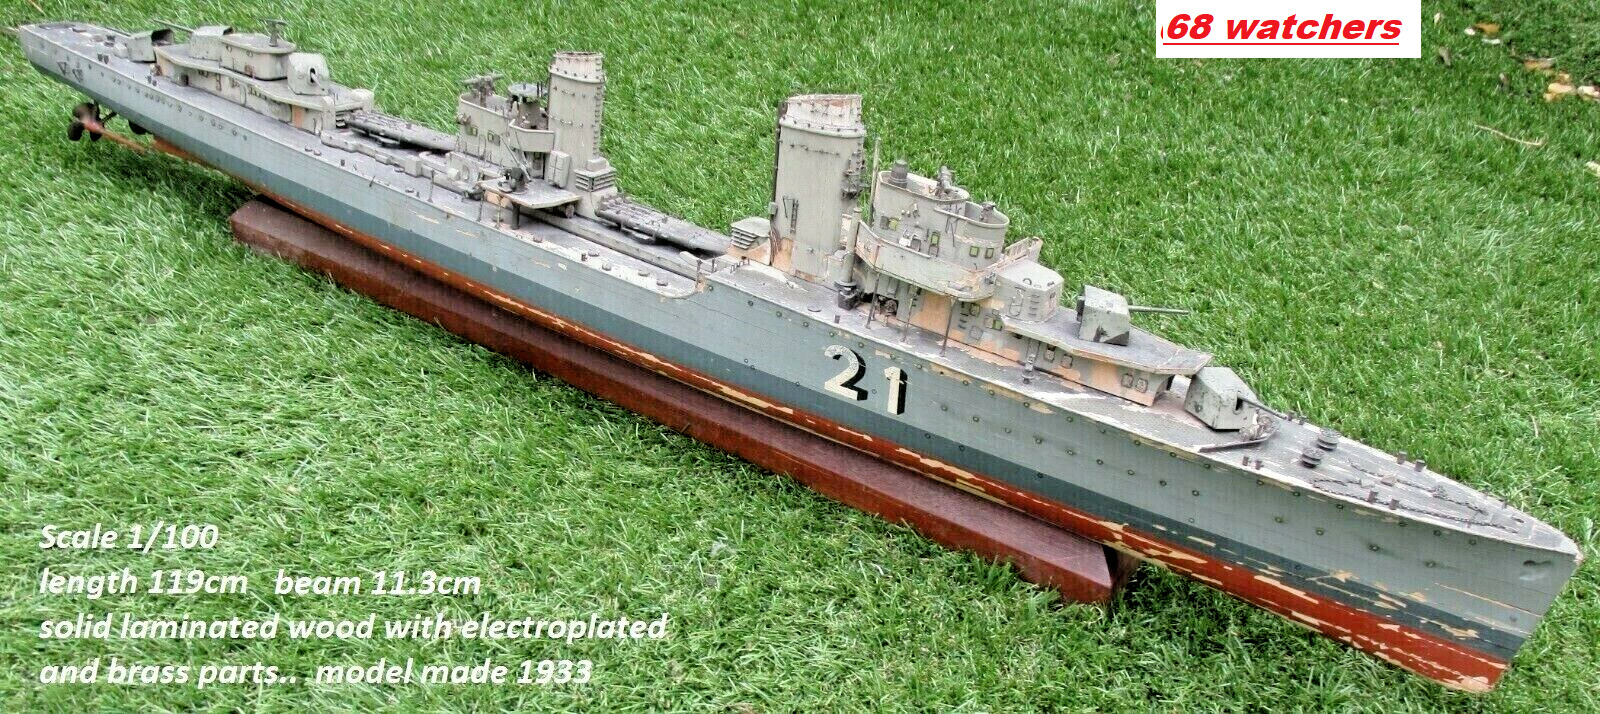 The ONLY 1933 Concept & Builder's model of all 21 of Germany's WW2 Destroyers, 